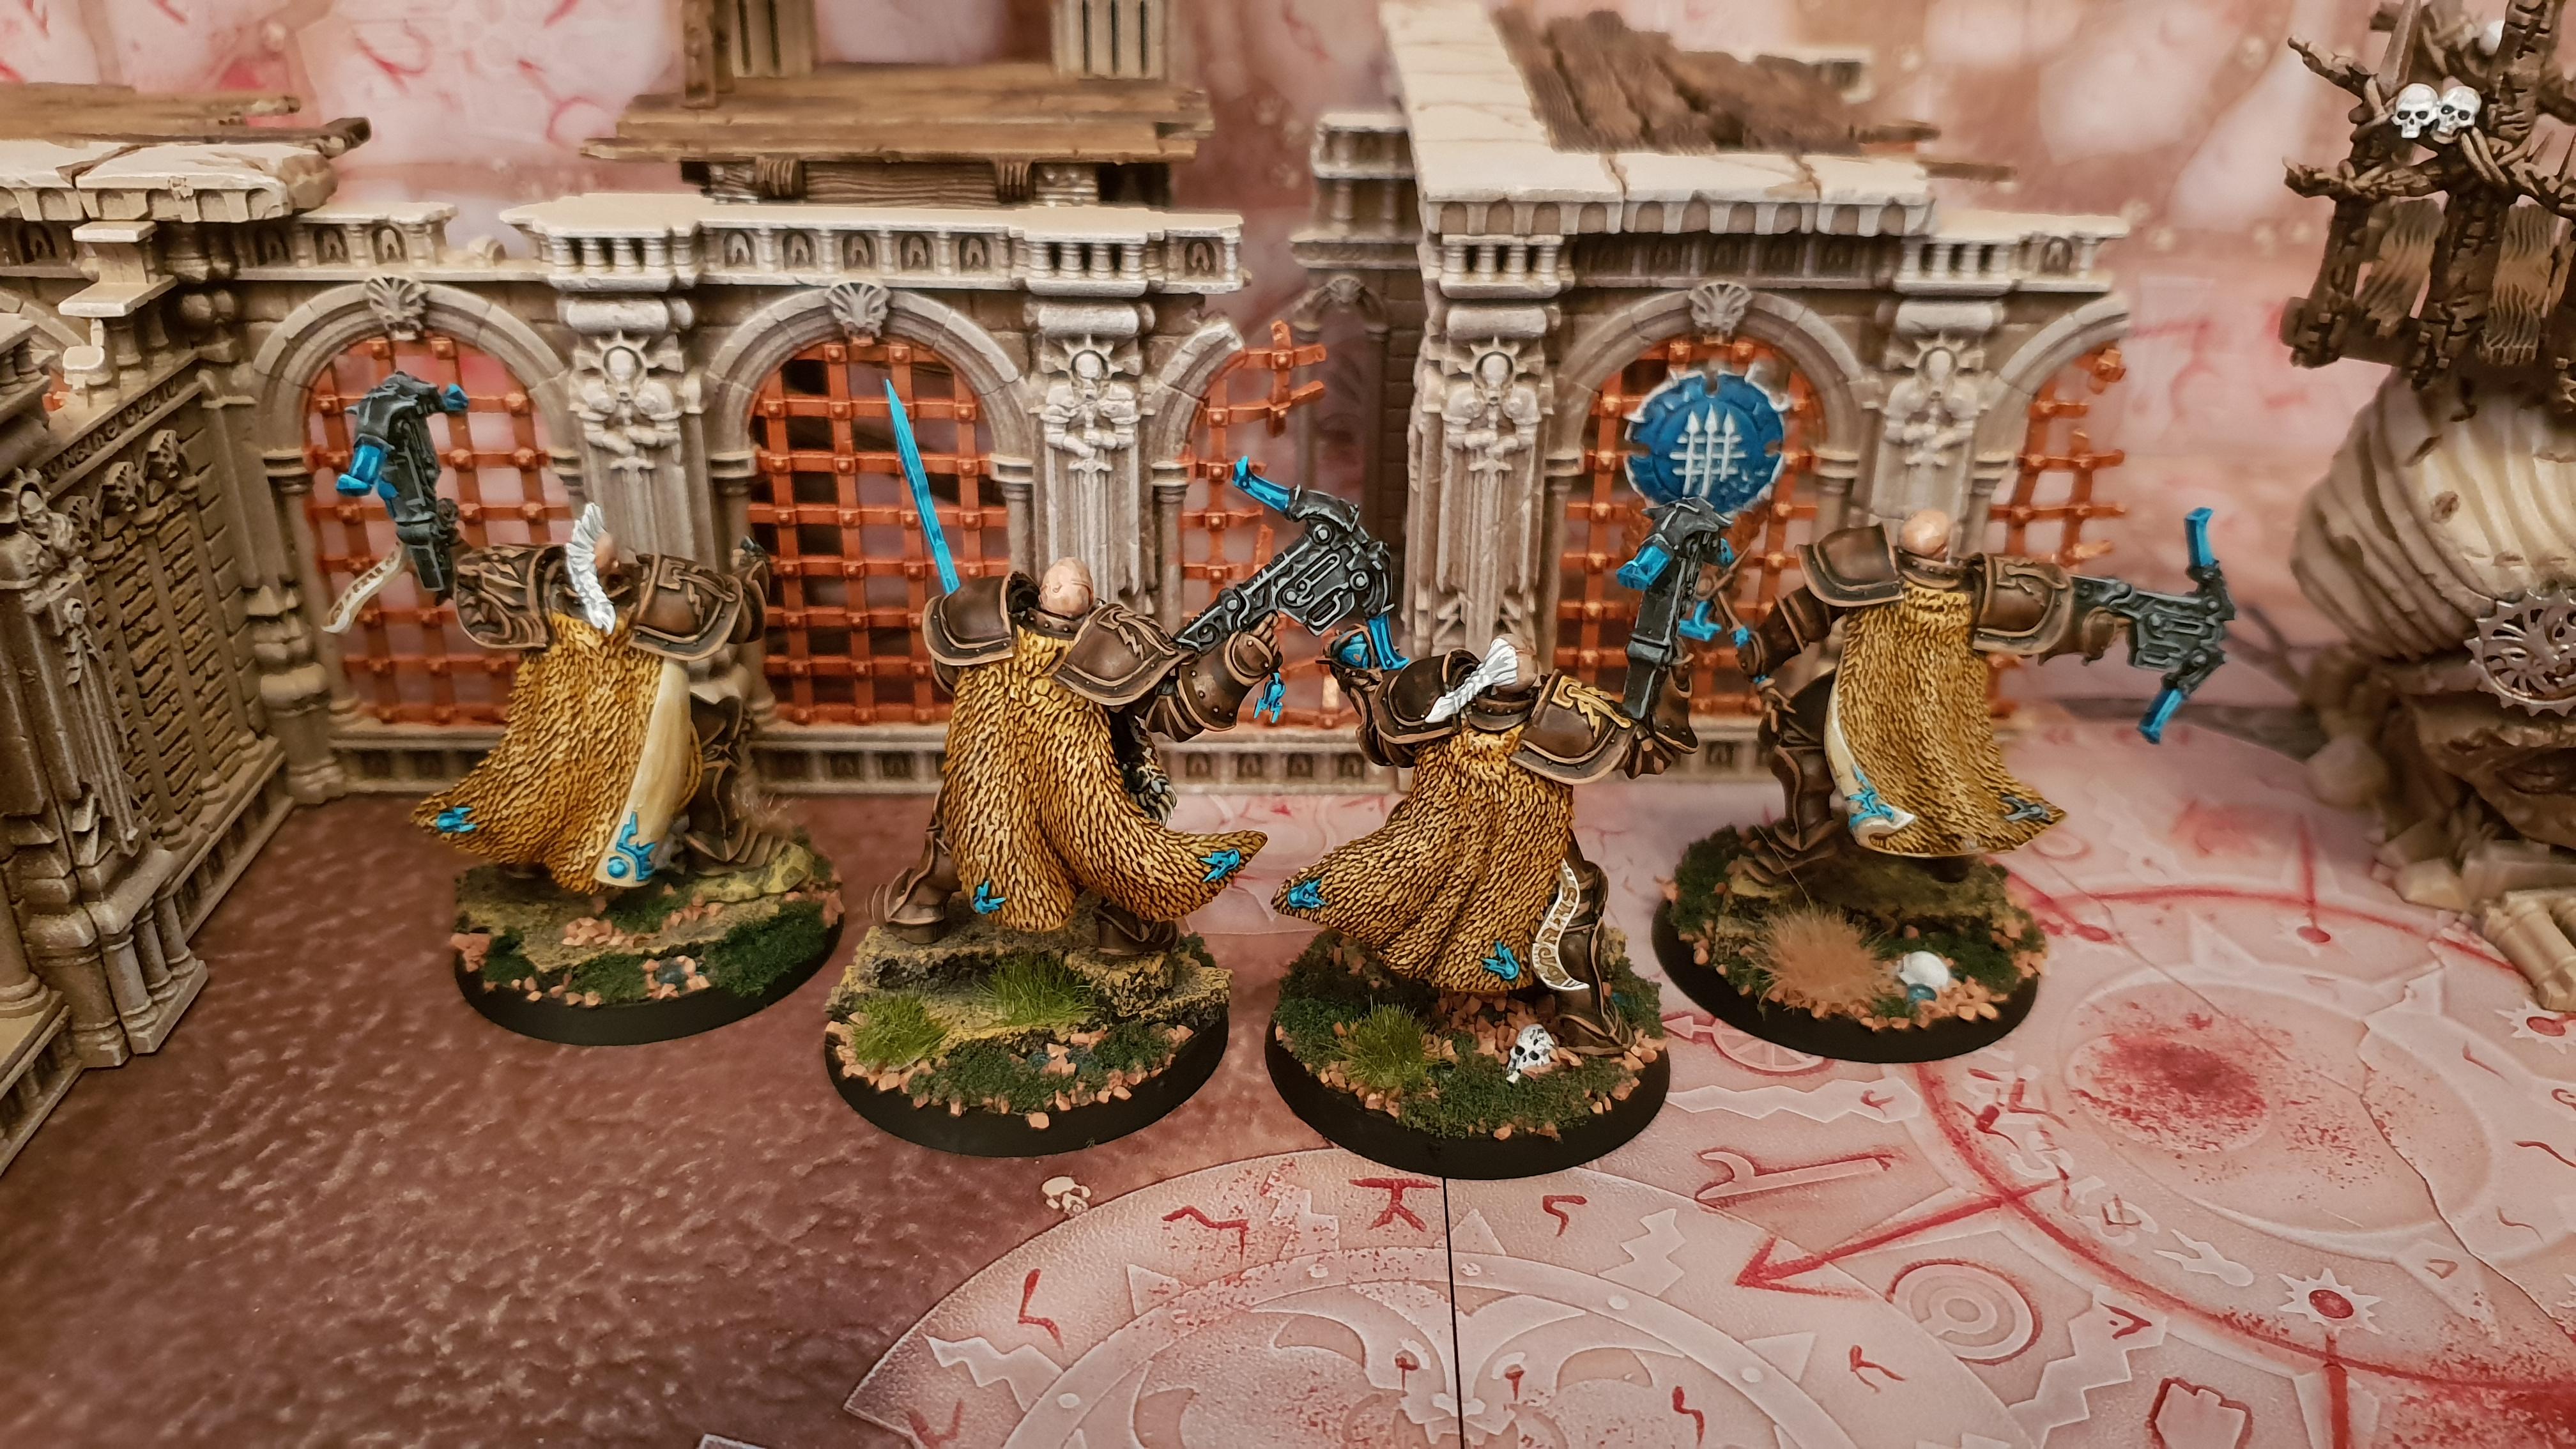 Conversion, Eternals, Stormcast, Warband, Warcry